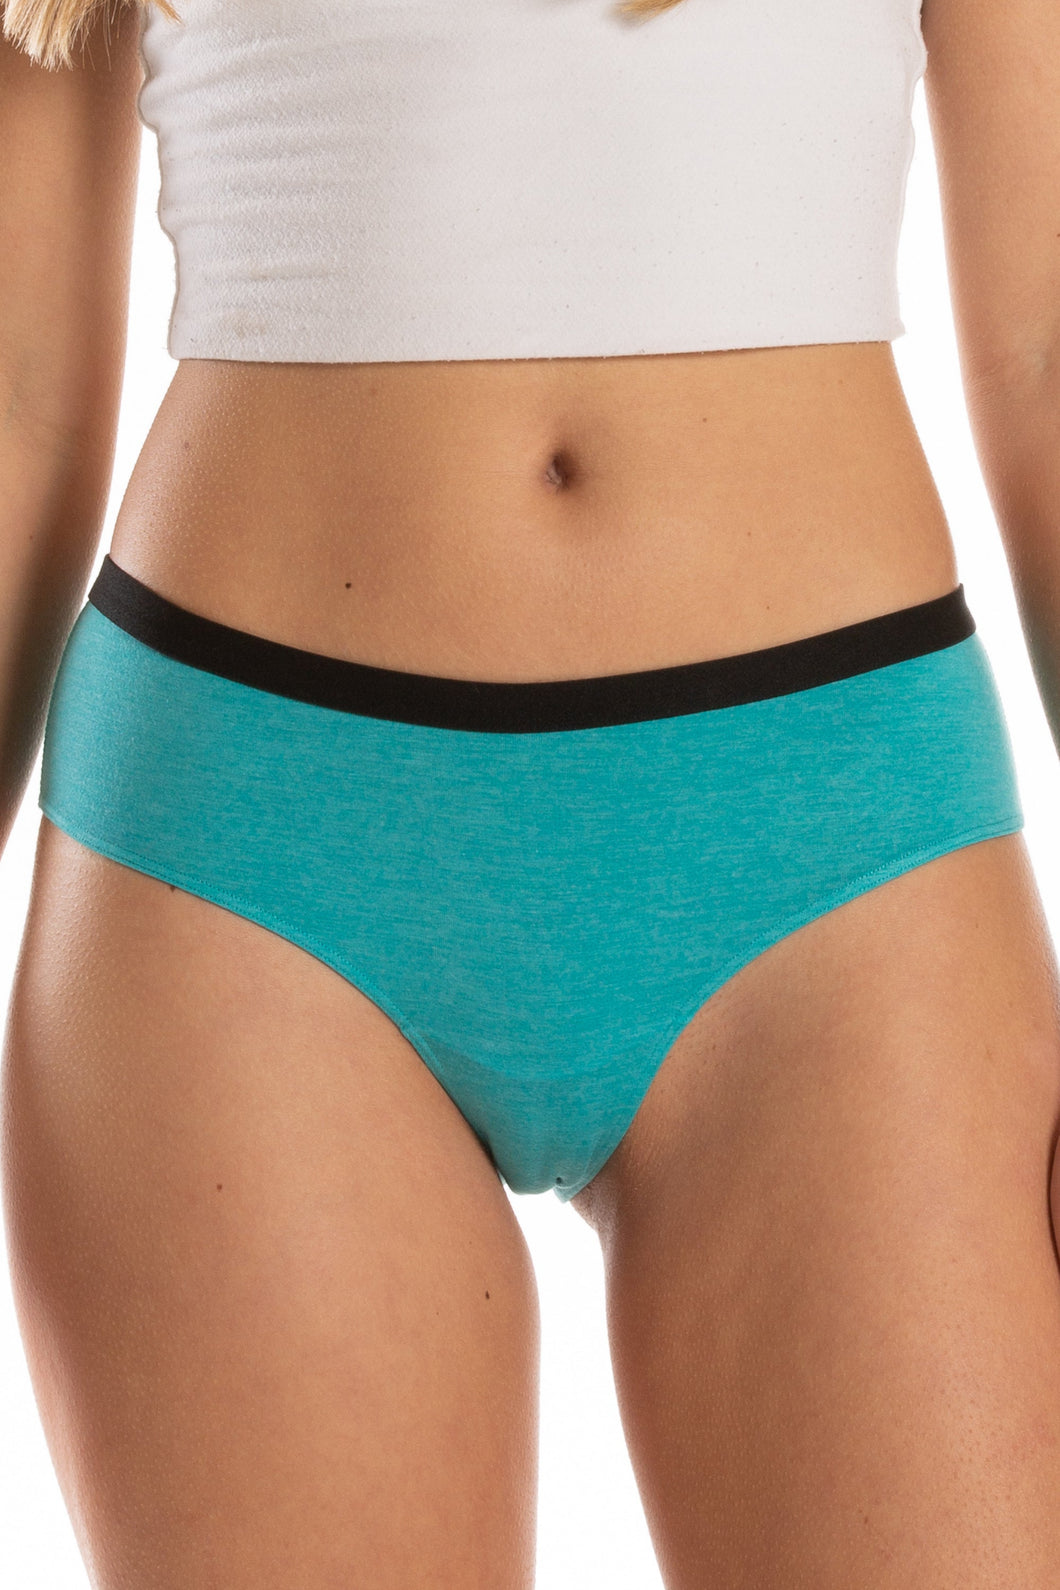 The Nerves of Teal | Teal Heather Cheeky Underwear